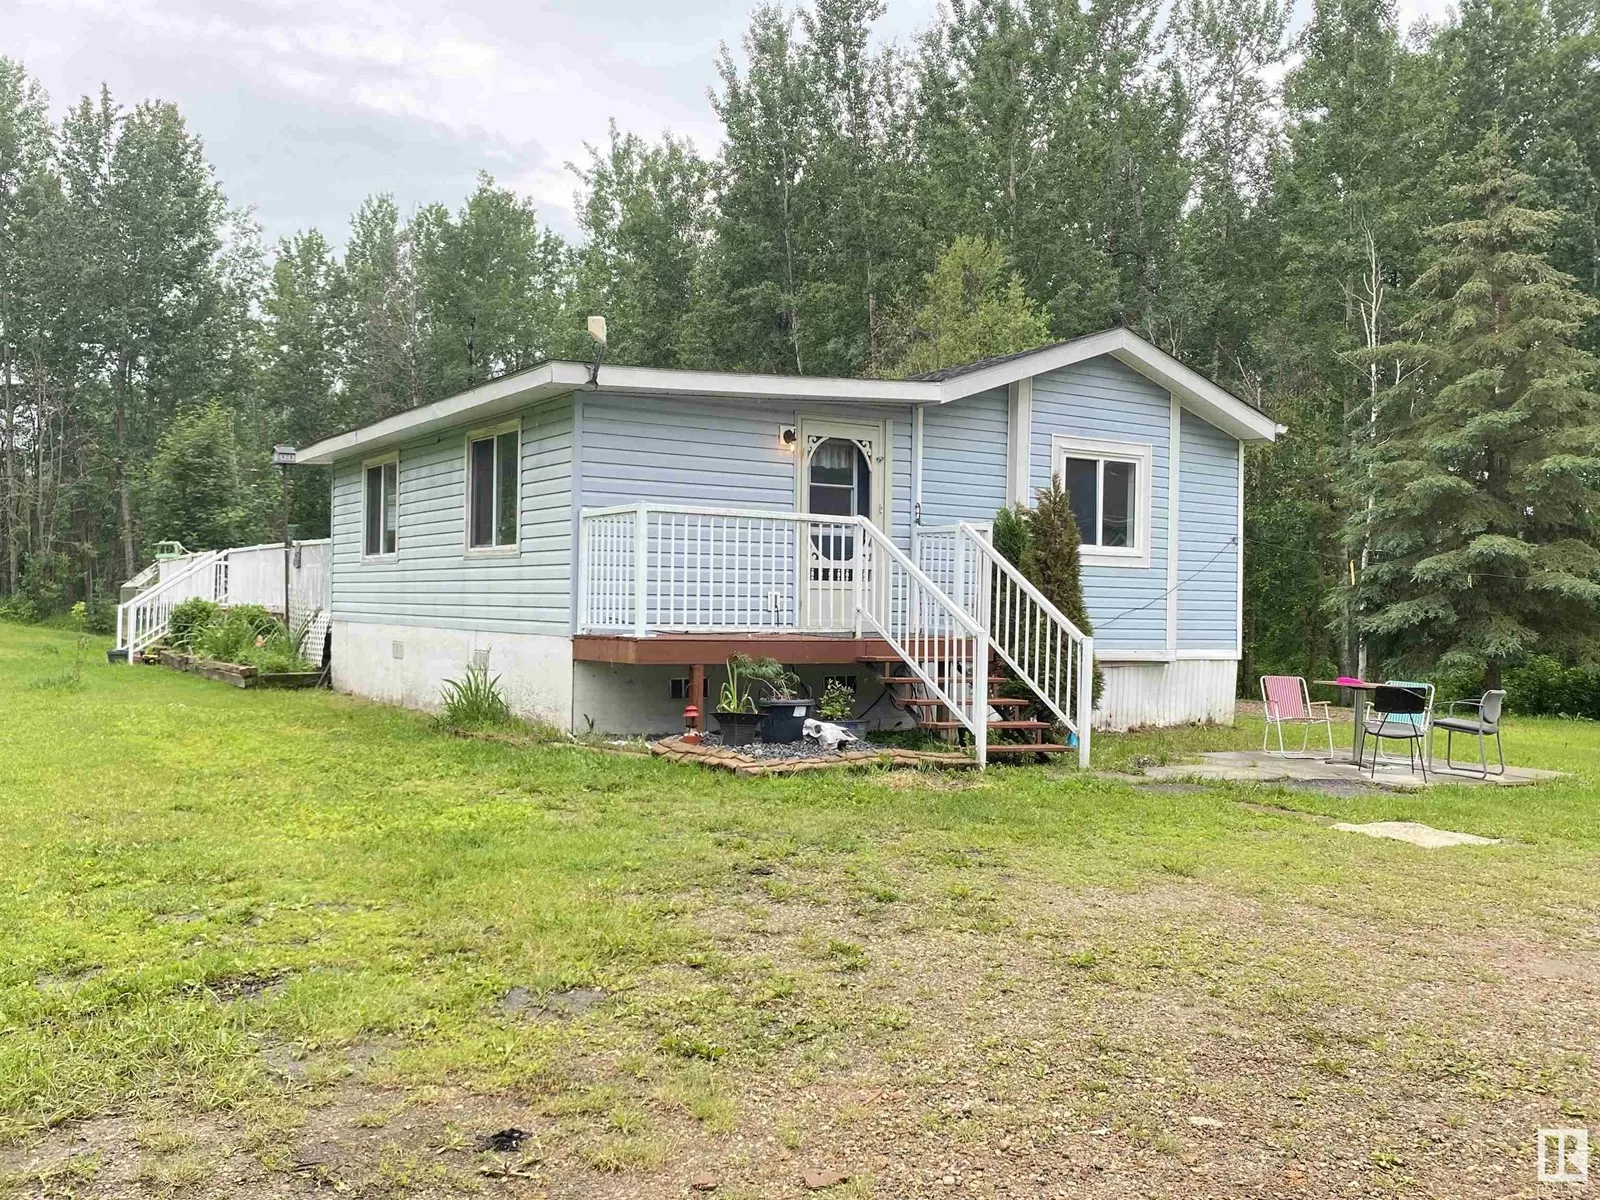 Manufactured Home for rent: 63213 Hwy 801, Rural Westlock County, Alberta T0G 0S0